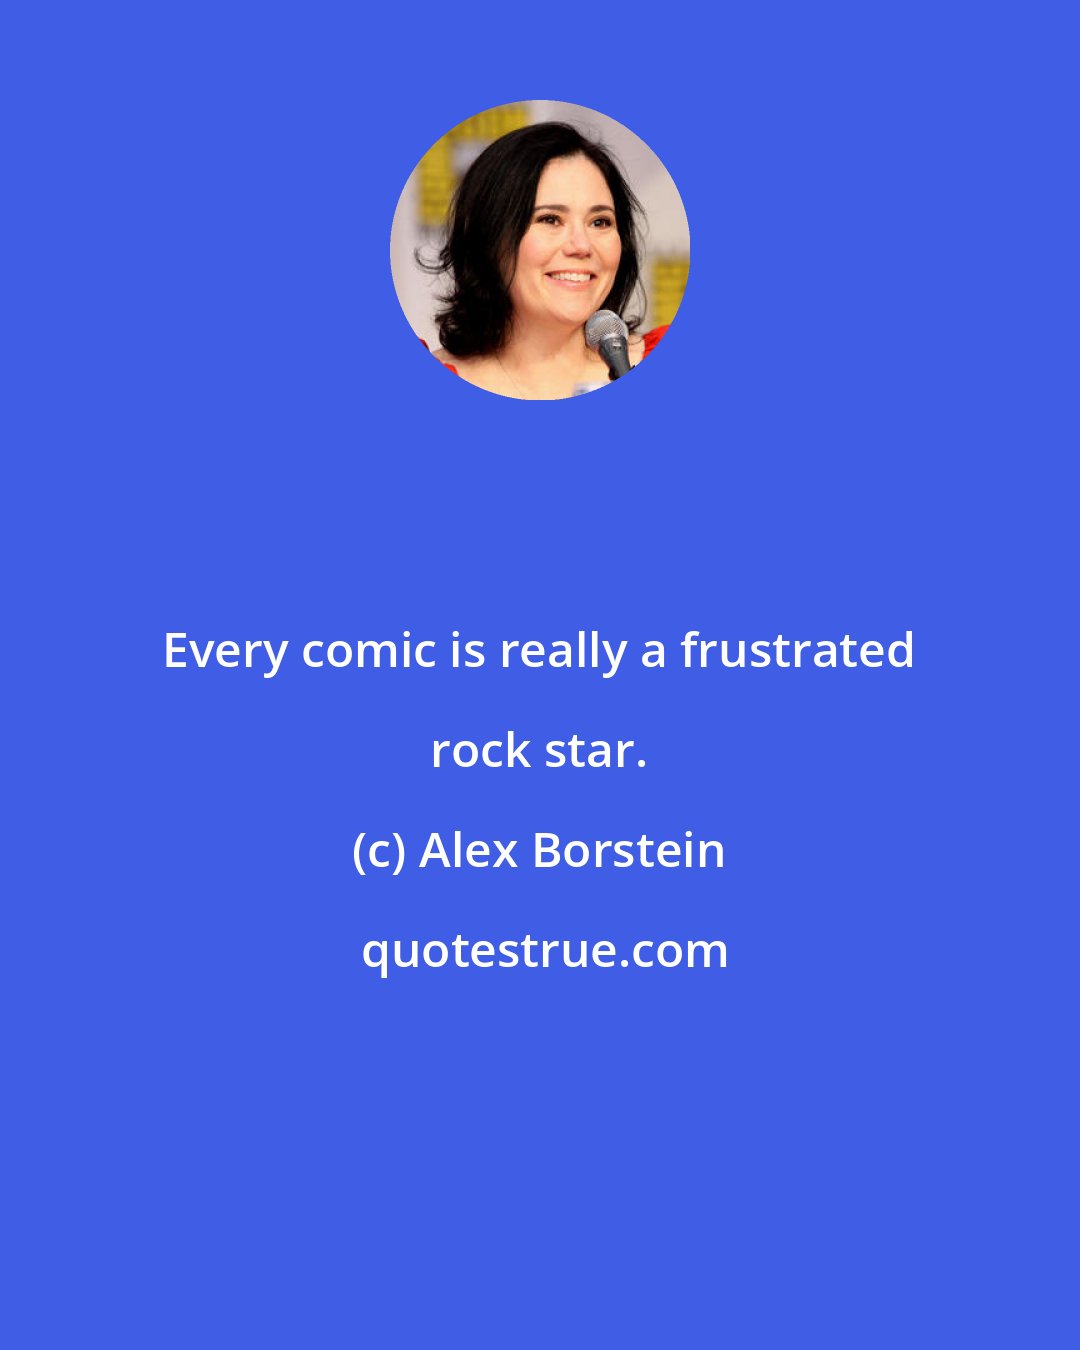 Alex Borstein: Every comic is really a frustrated rock star.